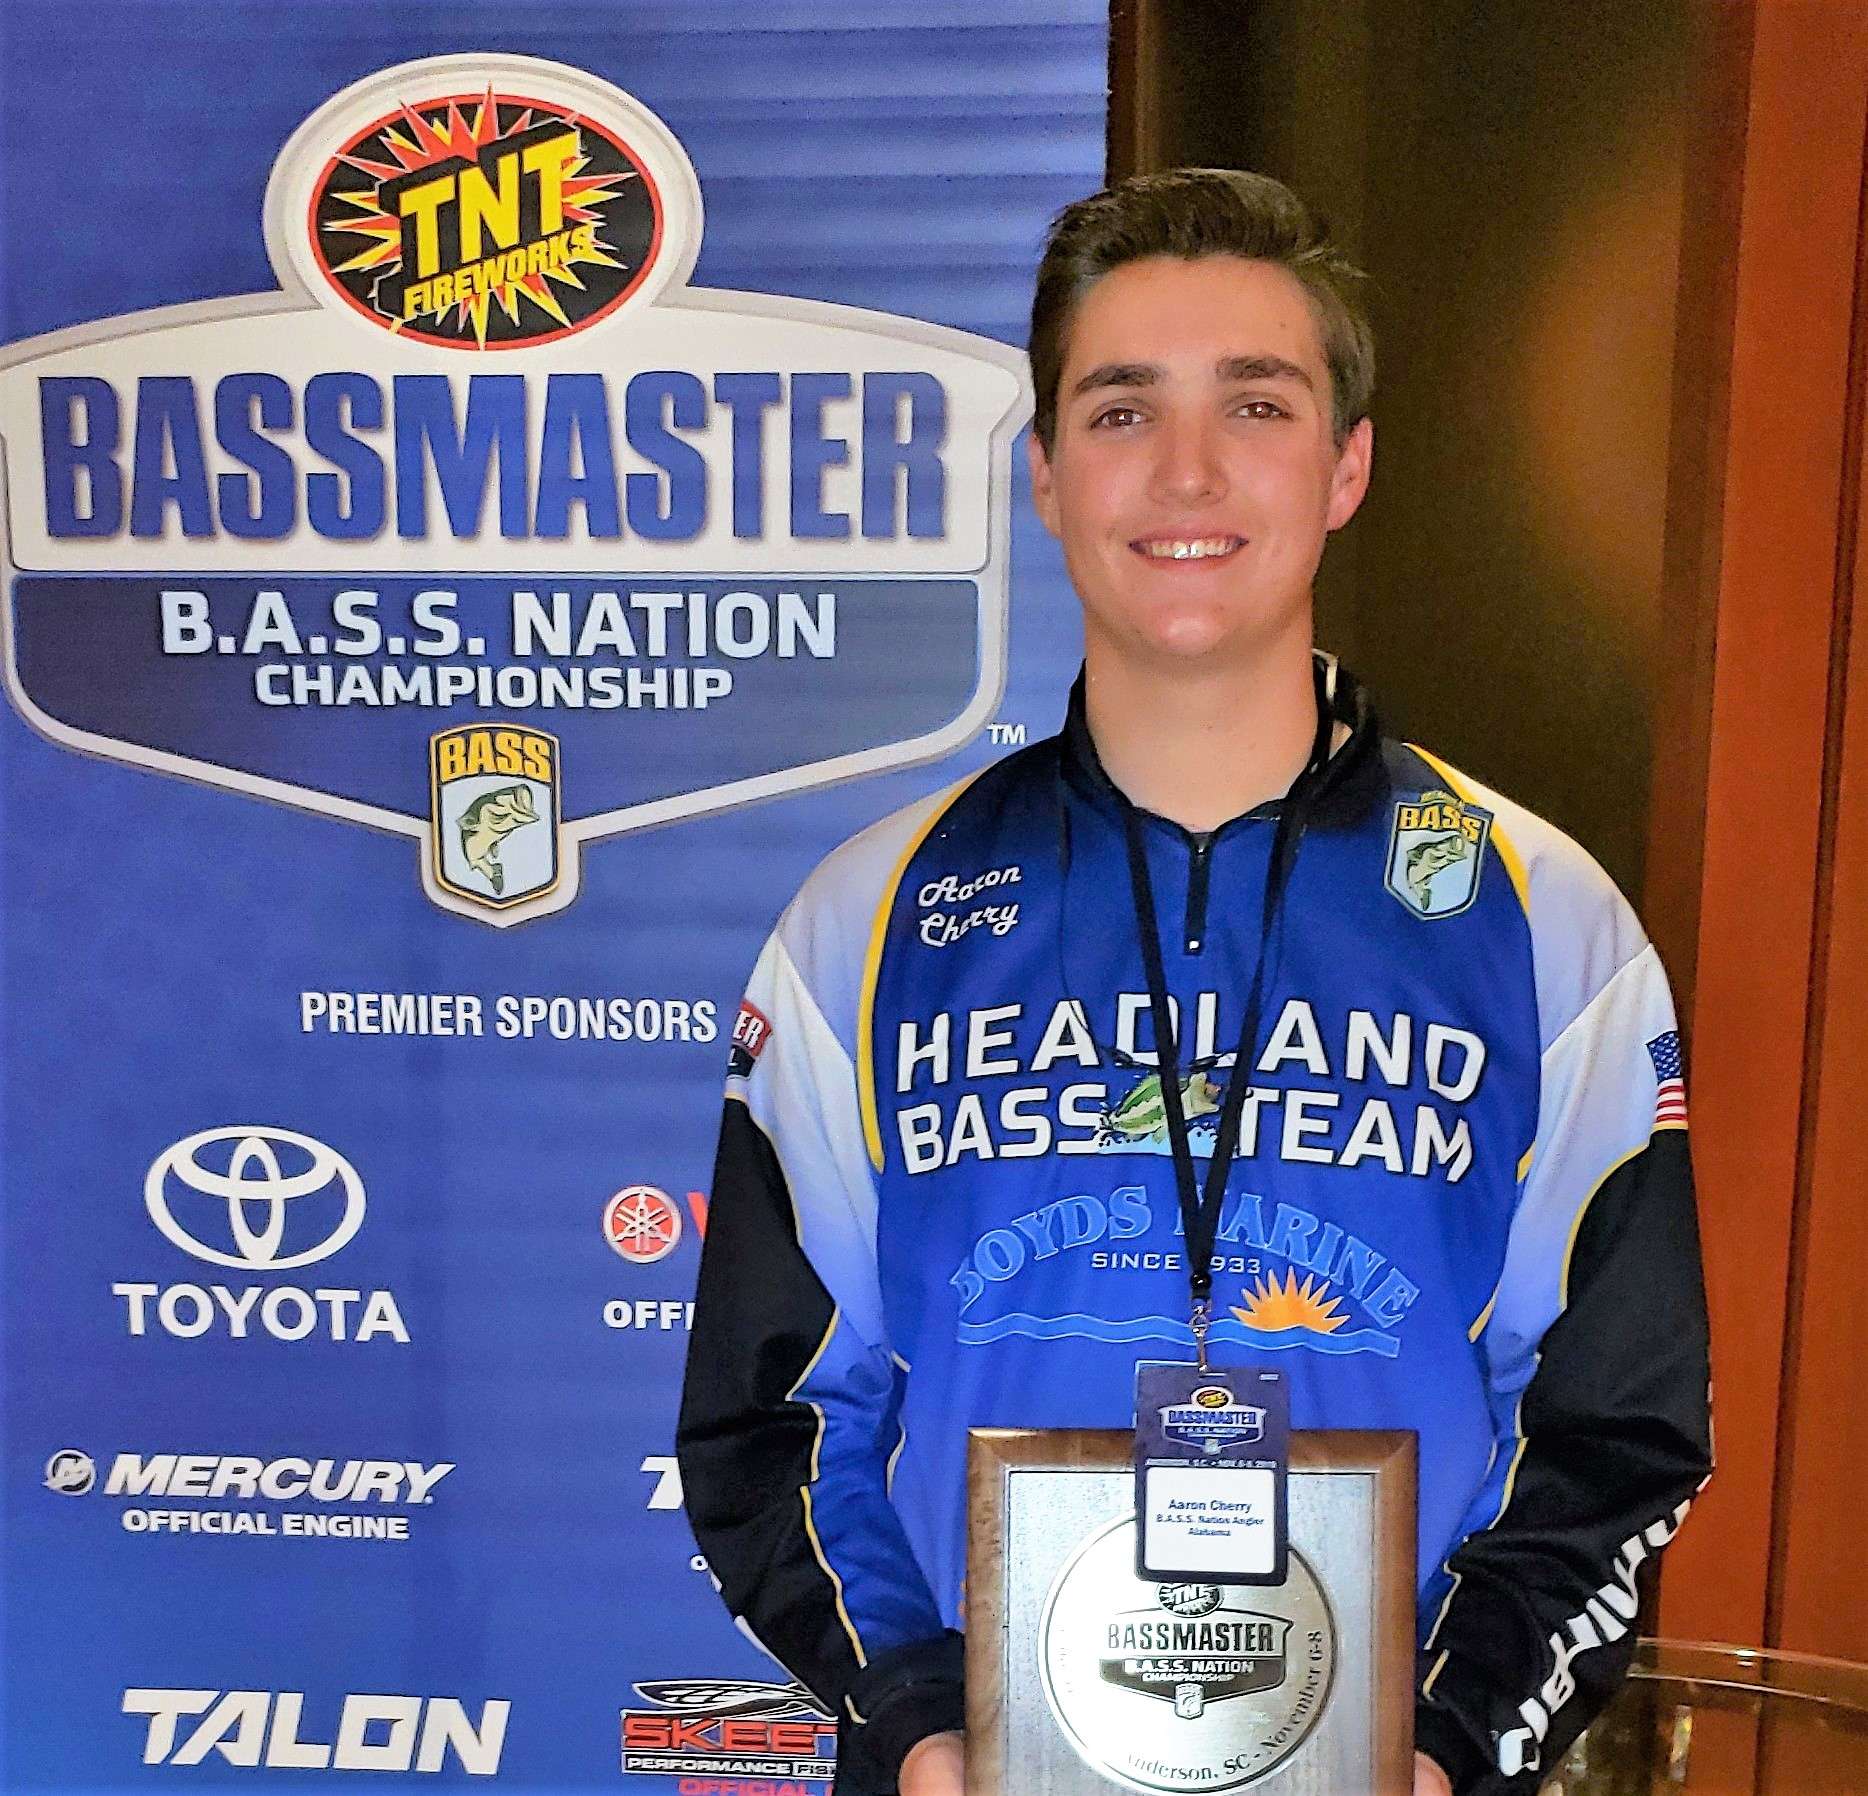 <b>Aaron Cherry, Kinsey, Ala.</b><br> Cherry, a senior at Headland High School, has secured five wins this tournament season, including Bassmaster High School Classic Champion, as well as three Top 5 finishes and six Top 20 finishes in high school events. Cherry has earned the angler of the year title in the East Alabama High School Bass Trail twice and has ranked in the Top 5 in the Alabama B.A.S.S. Nation Angler of the Year standings three times in the last four years. Cherry also fishes in adult tournaments and ranked in the Top 20 in the B.A.S.S. Nation Championship this tournament season, as well as winning the Alabama B.A.S.S. Nation State Championship in 2018 as a co-angler.   <p> Cherry dedicates much of his time to teaching others about fishing and introducing them to the sport. He has helped raise over $50,000 for the Headland Bass Team over the duration of his six years as a member and has volunteered 200 hours with Wired Ministries.    <p> âAaron is not only a great fisherman, as the results show, he is a great man,â said Chris Grandstaff, head coach of the Headland Bass Team. âAaron has always looked out for everyone. When he joined the Headland Bass Team, he soaked up all the knowledge he could from everyone about bass fishing. Aaron did this not only to help him become a better fisherman, but to also show and pass the knowledge he has obtained to others.  He has taken so many people fishing and helped them learn and love the sport of bass fishing as much as he does.â 